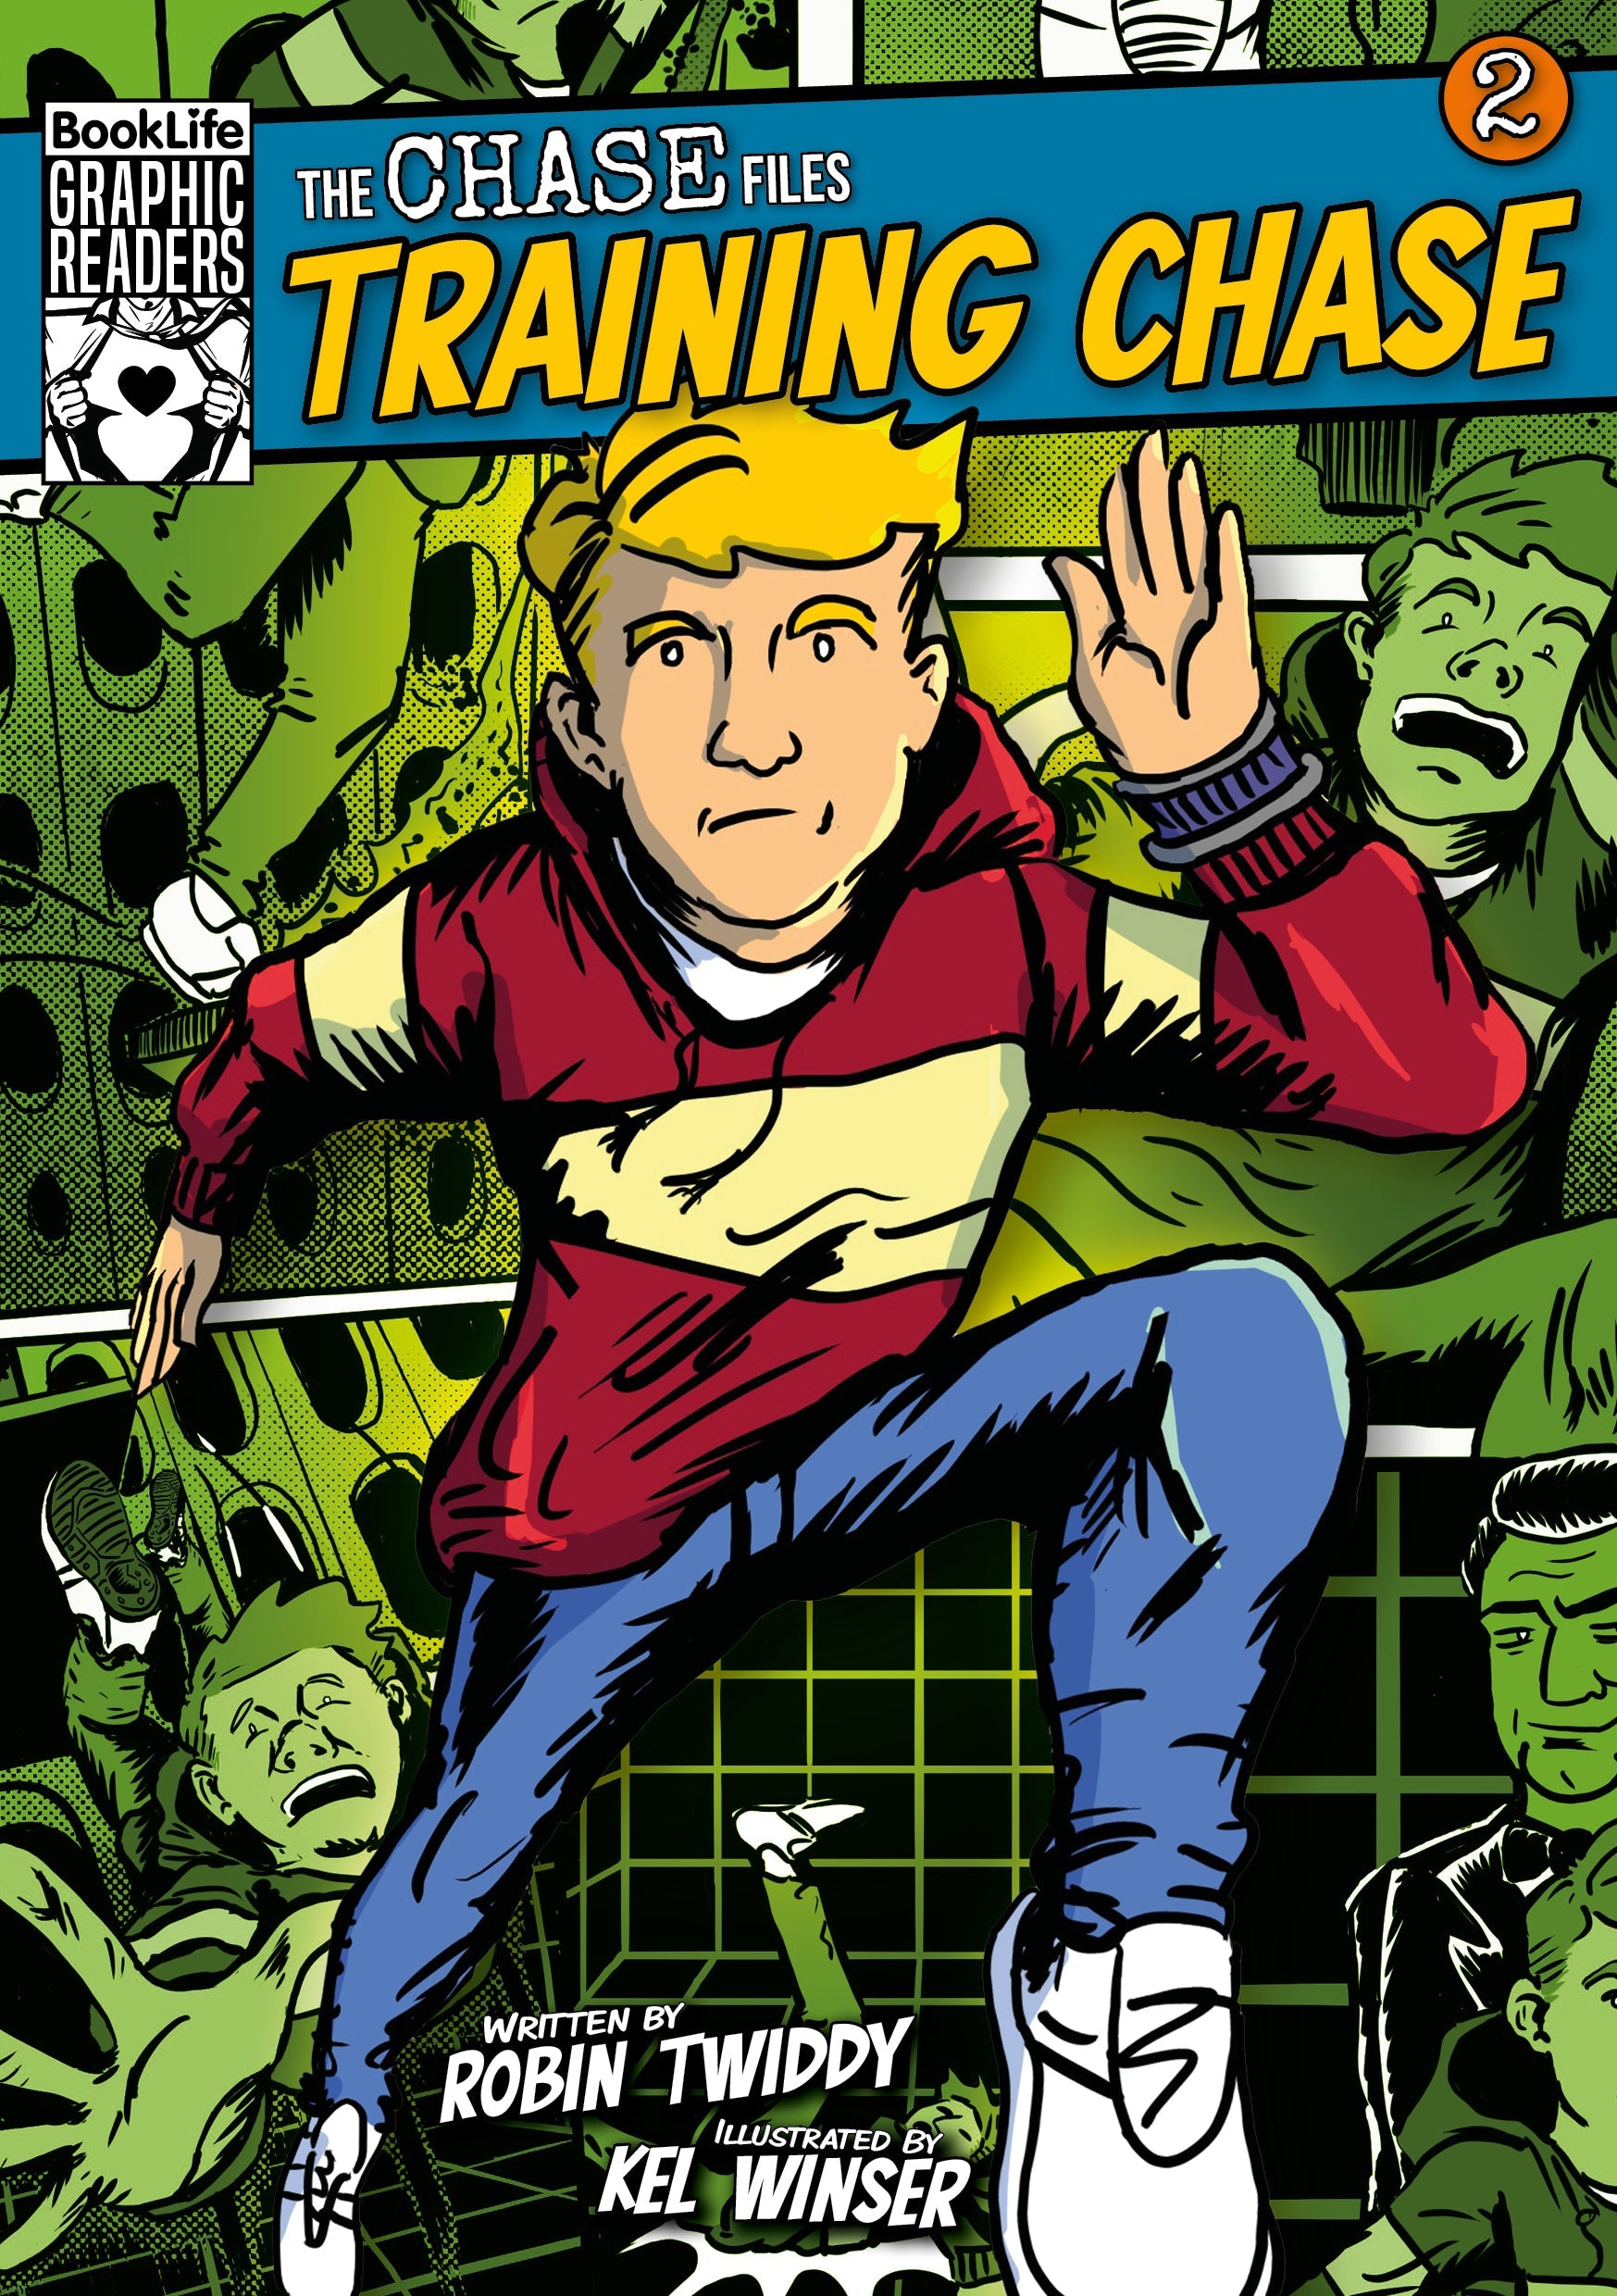 The Chase Files 2: Training Chase